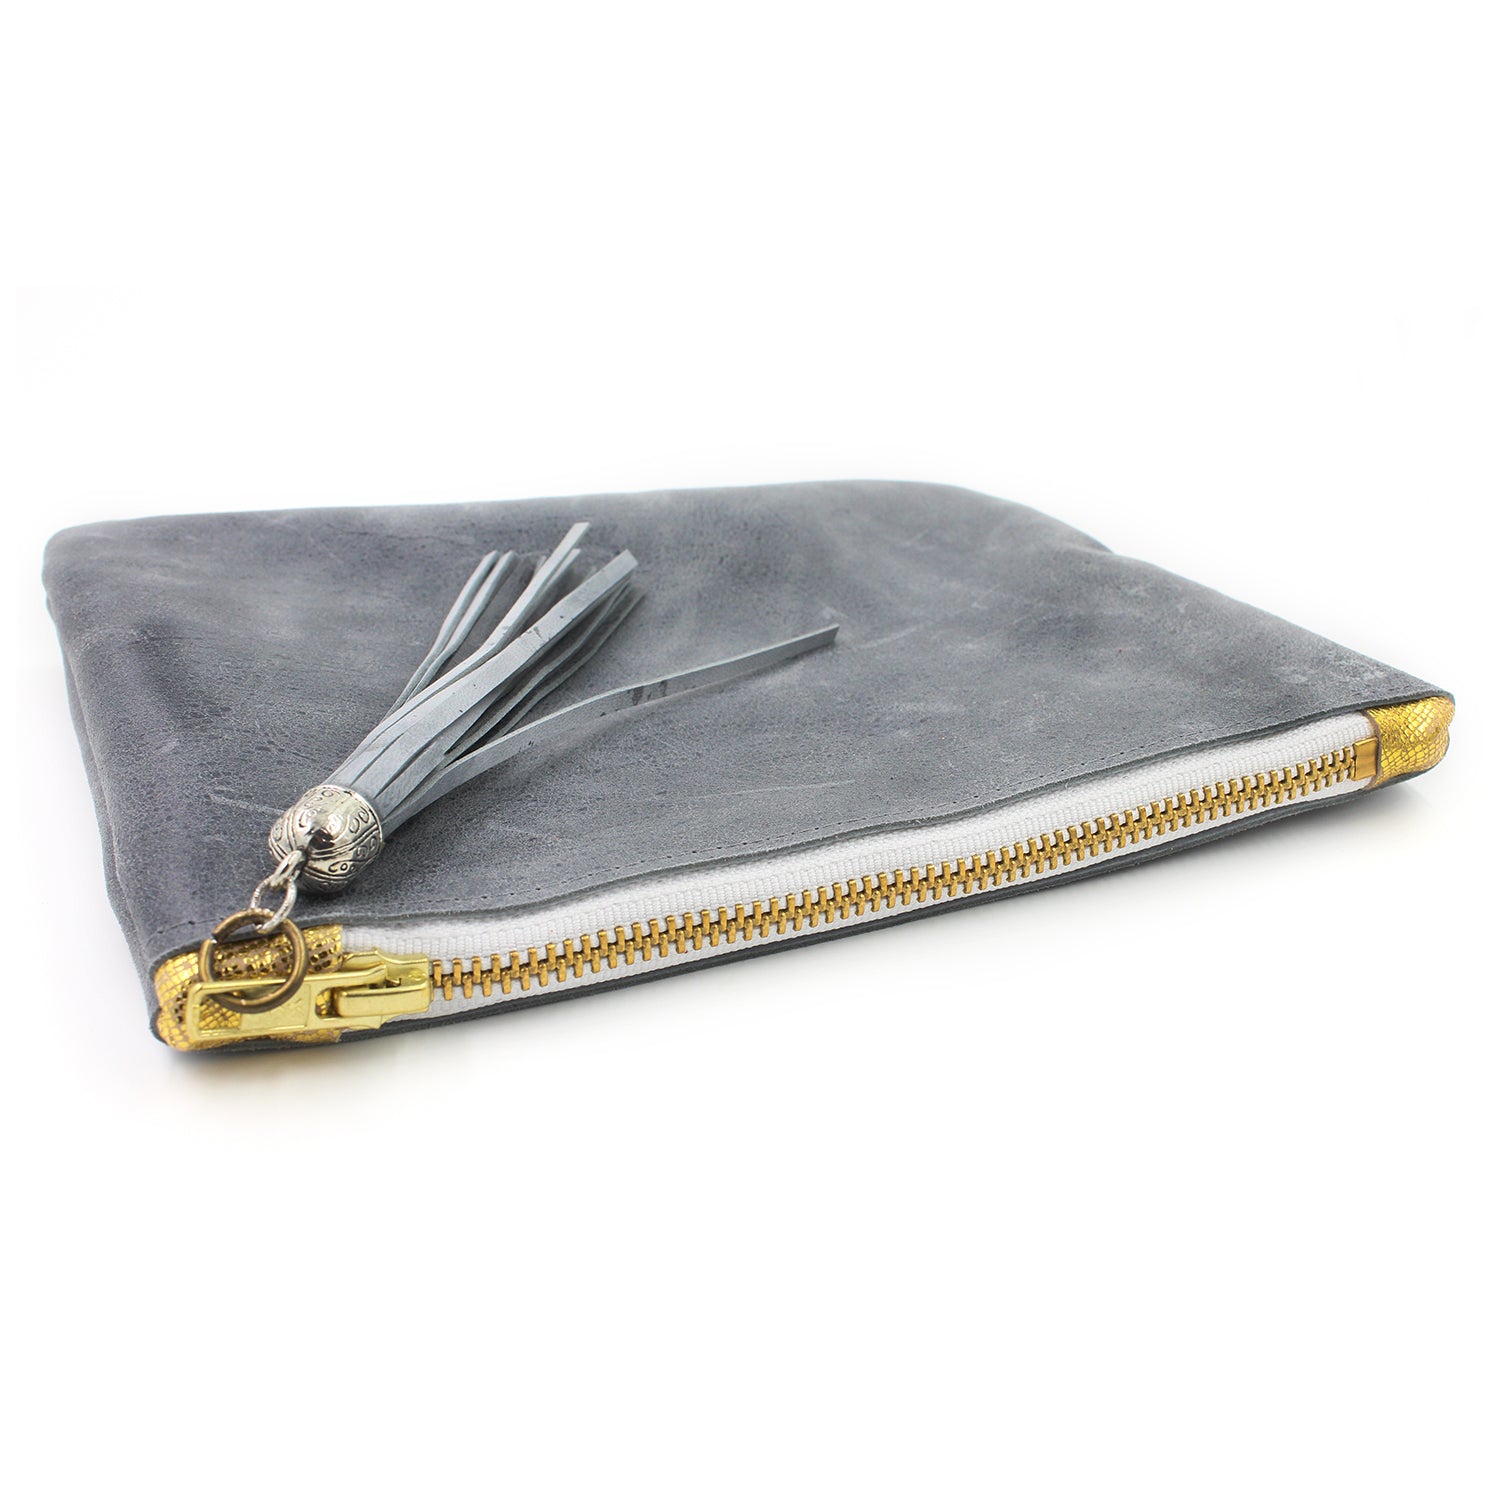 Distressed Grey Leather Cosmetic Bag/Clutch with Tassel